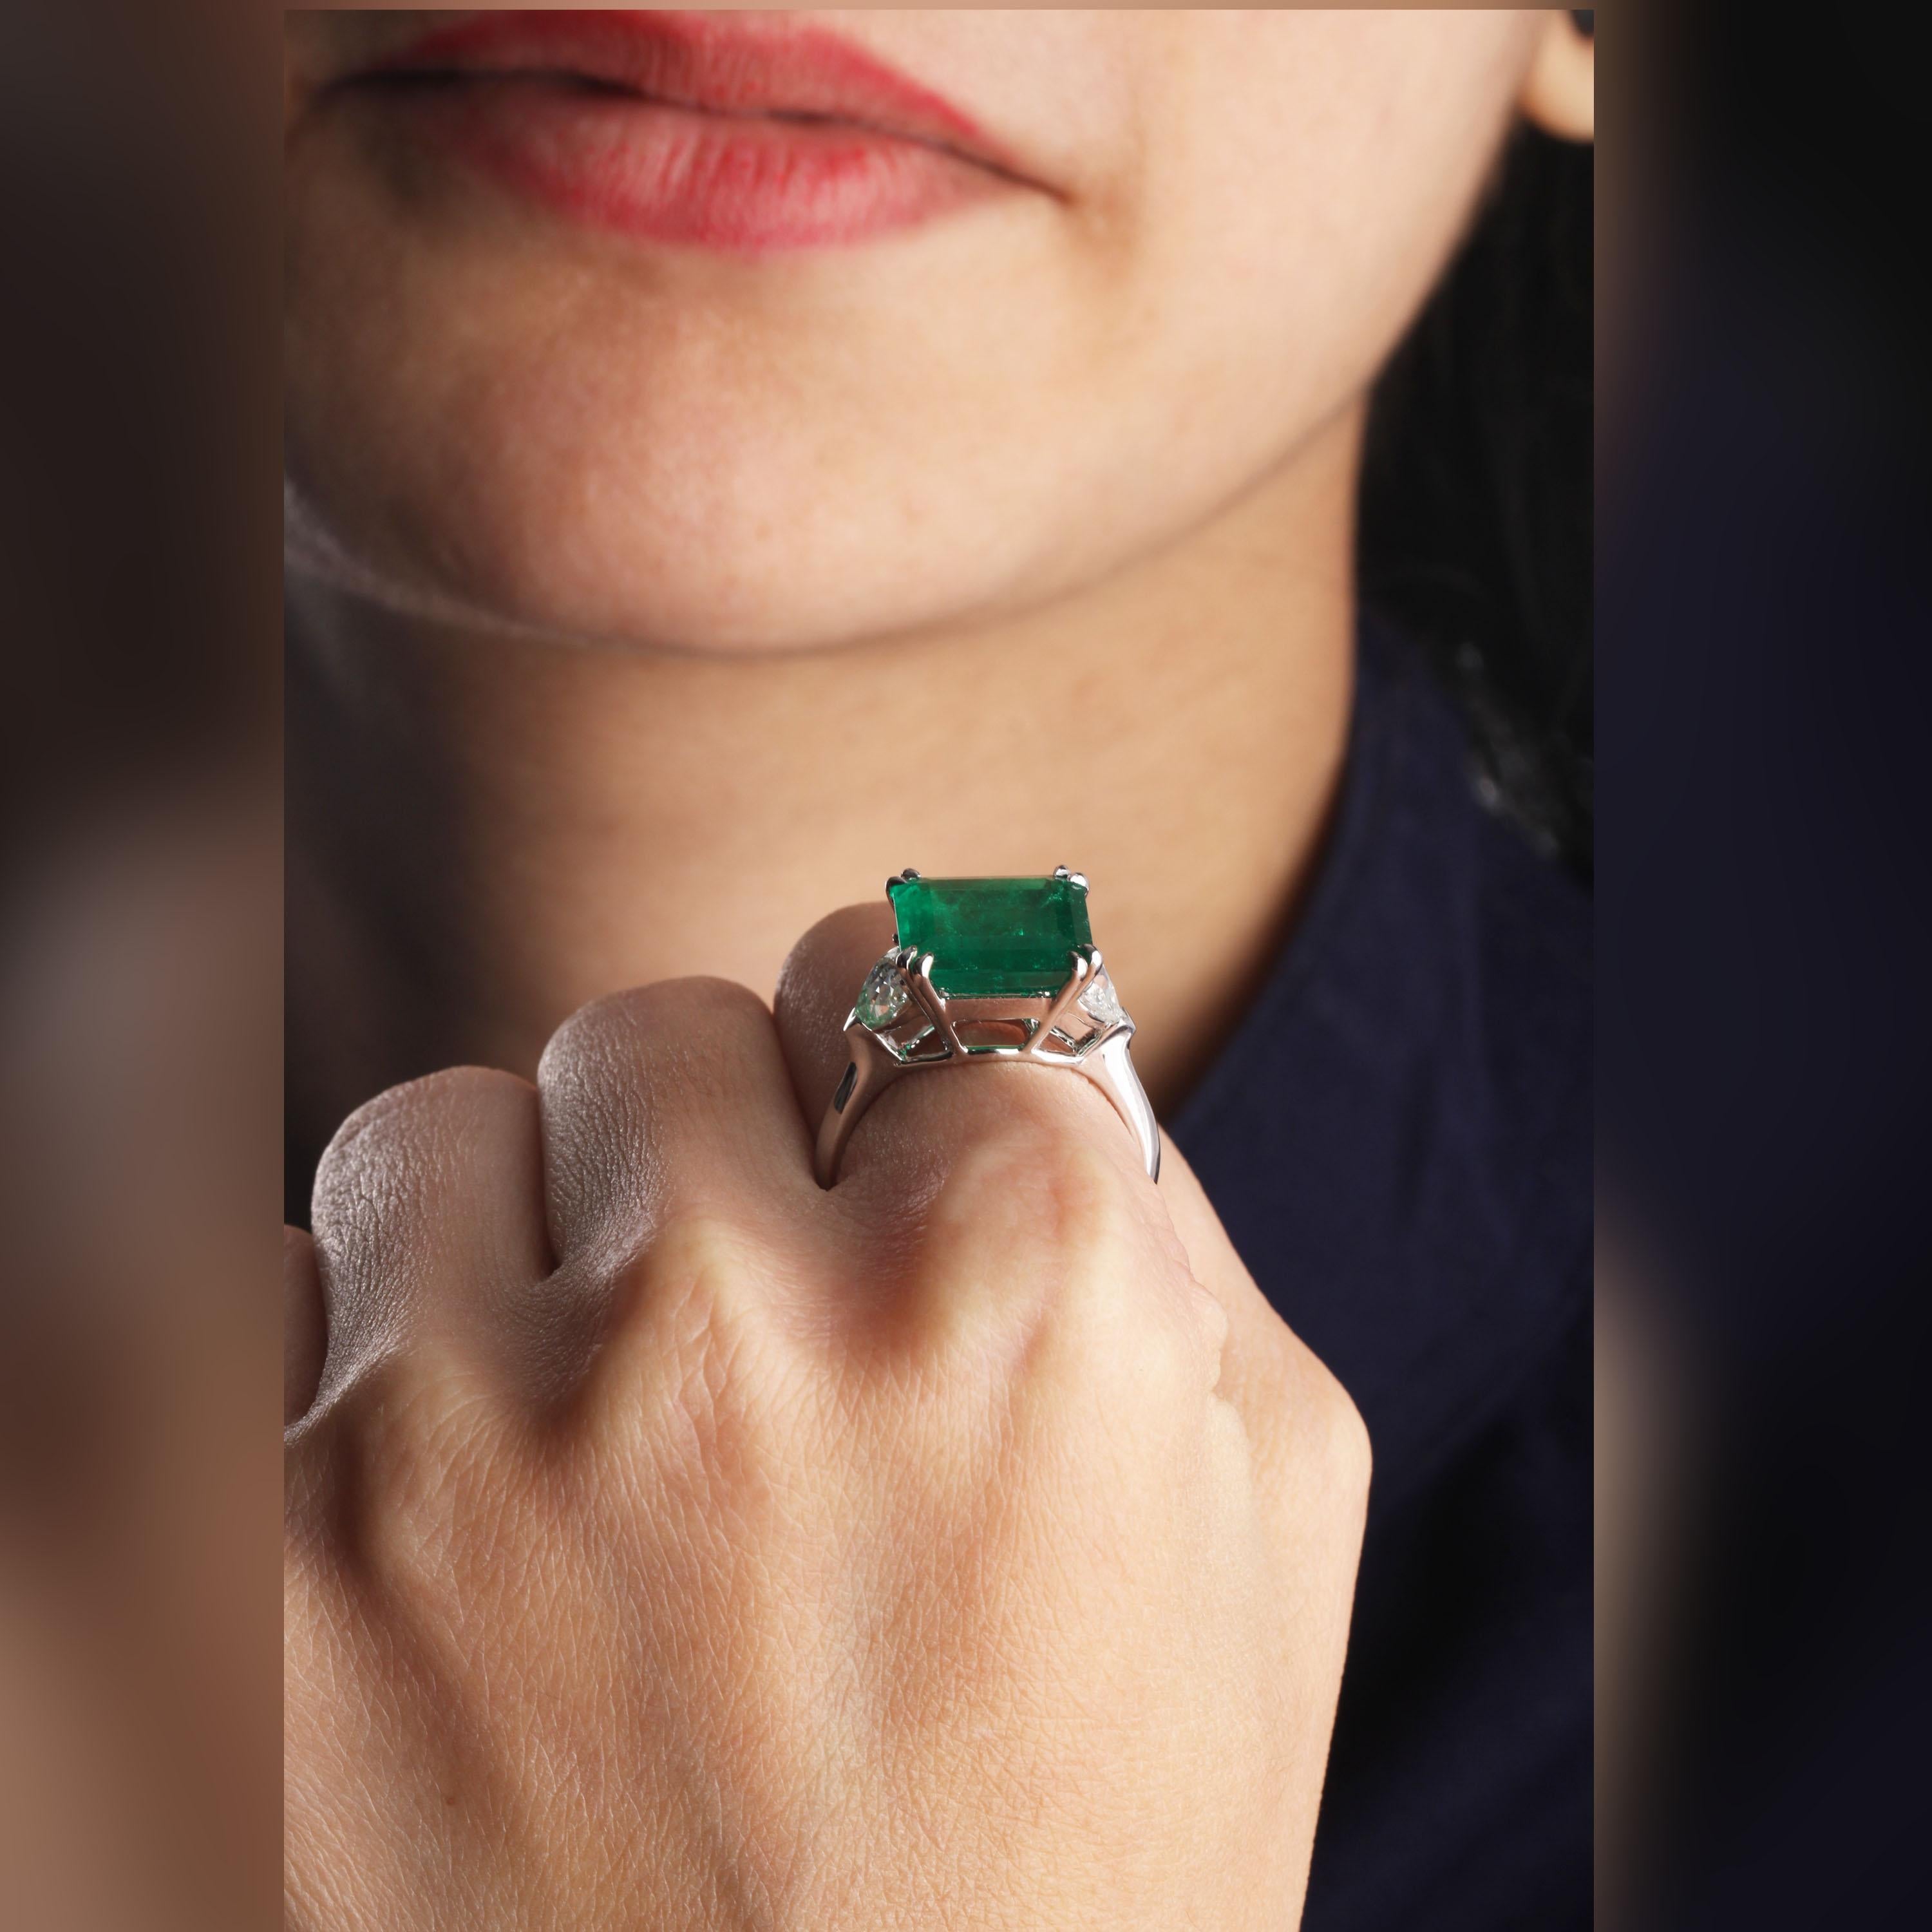 Gross Weight: 8.00 Grams
Diamond Weight: 0.96 cts
Emerald Weight: 5.51 cts
Ring Size: US 6.75  (Resizing can be done)
IGI Certification can be done on request.

Video of the product can be shared on request.

Perfectionism is evident in this